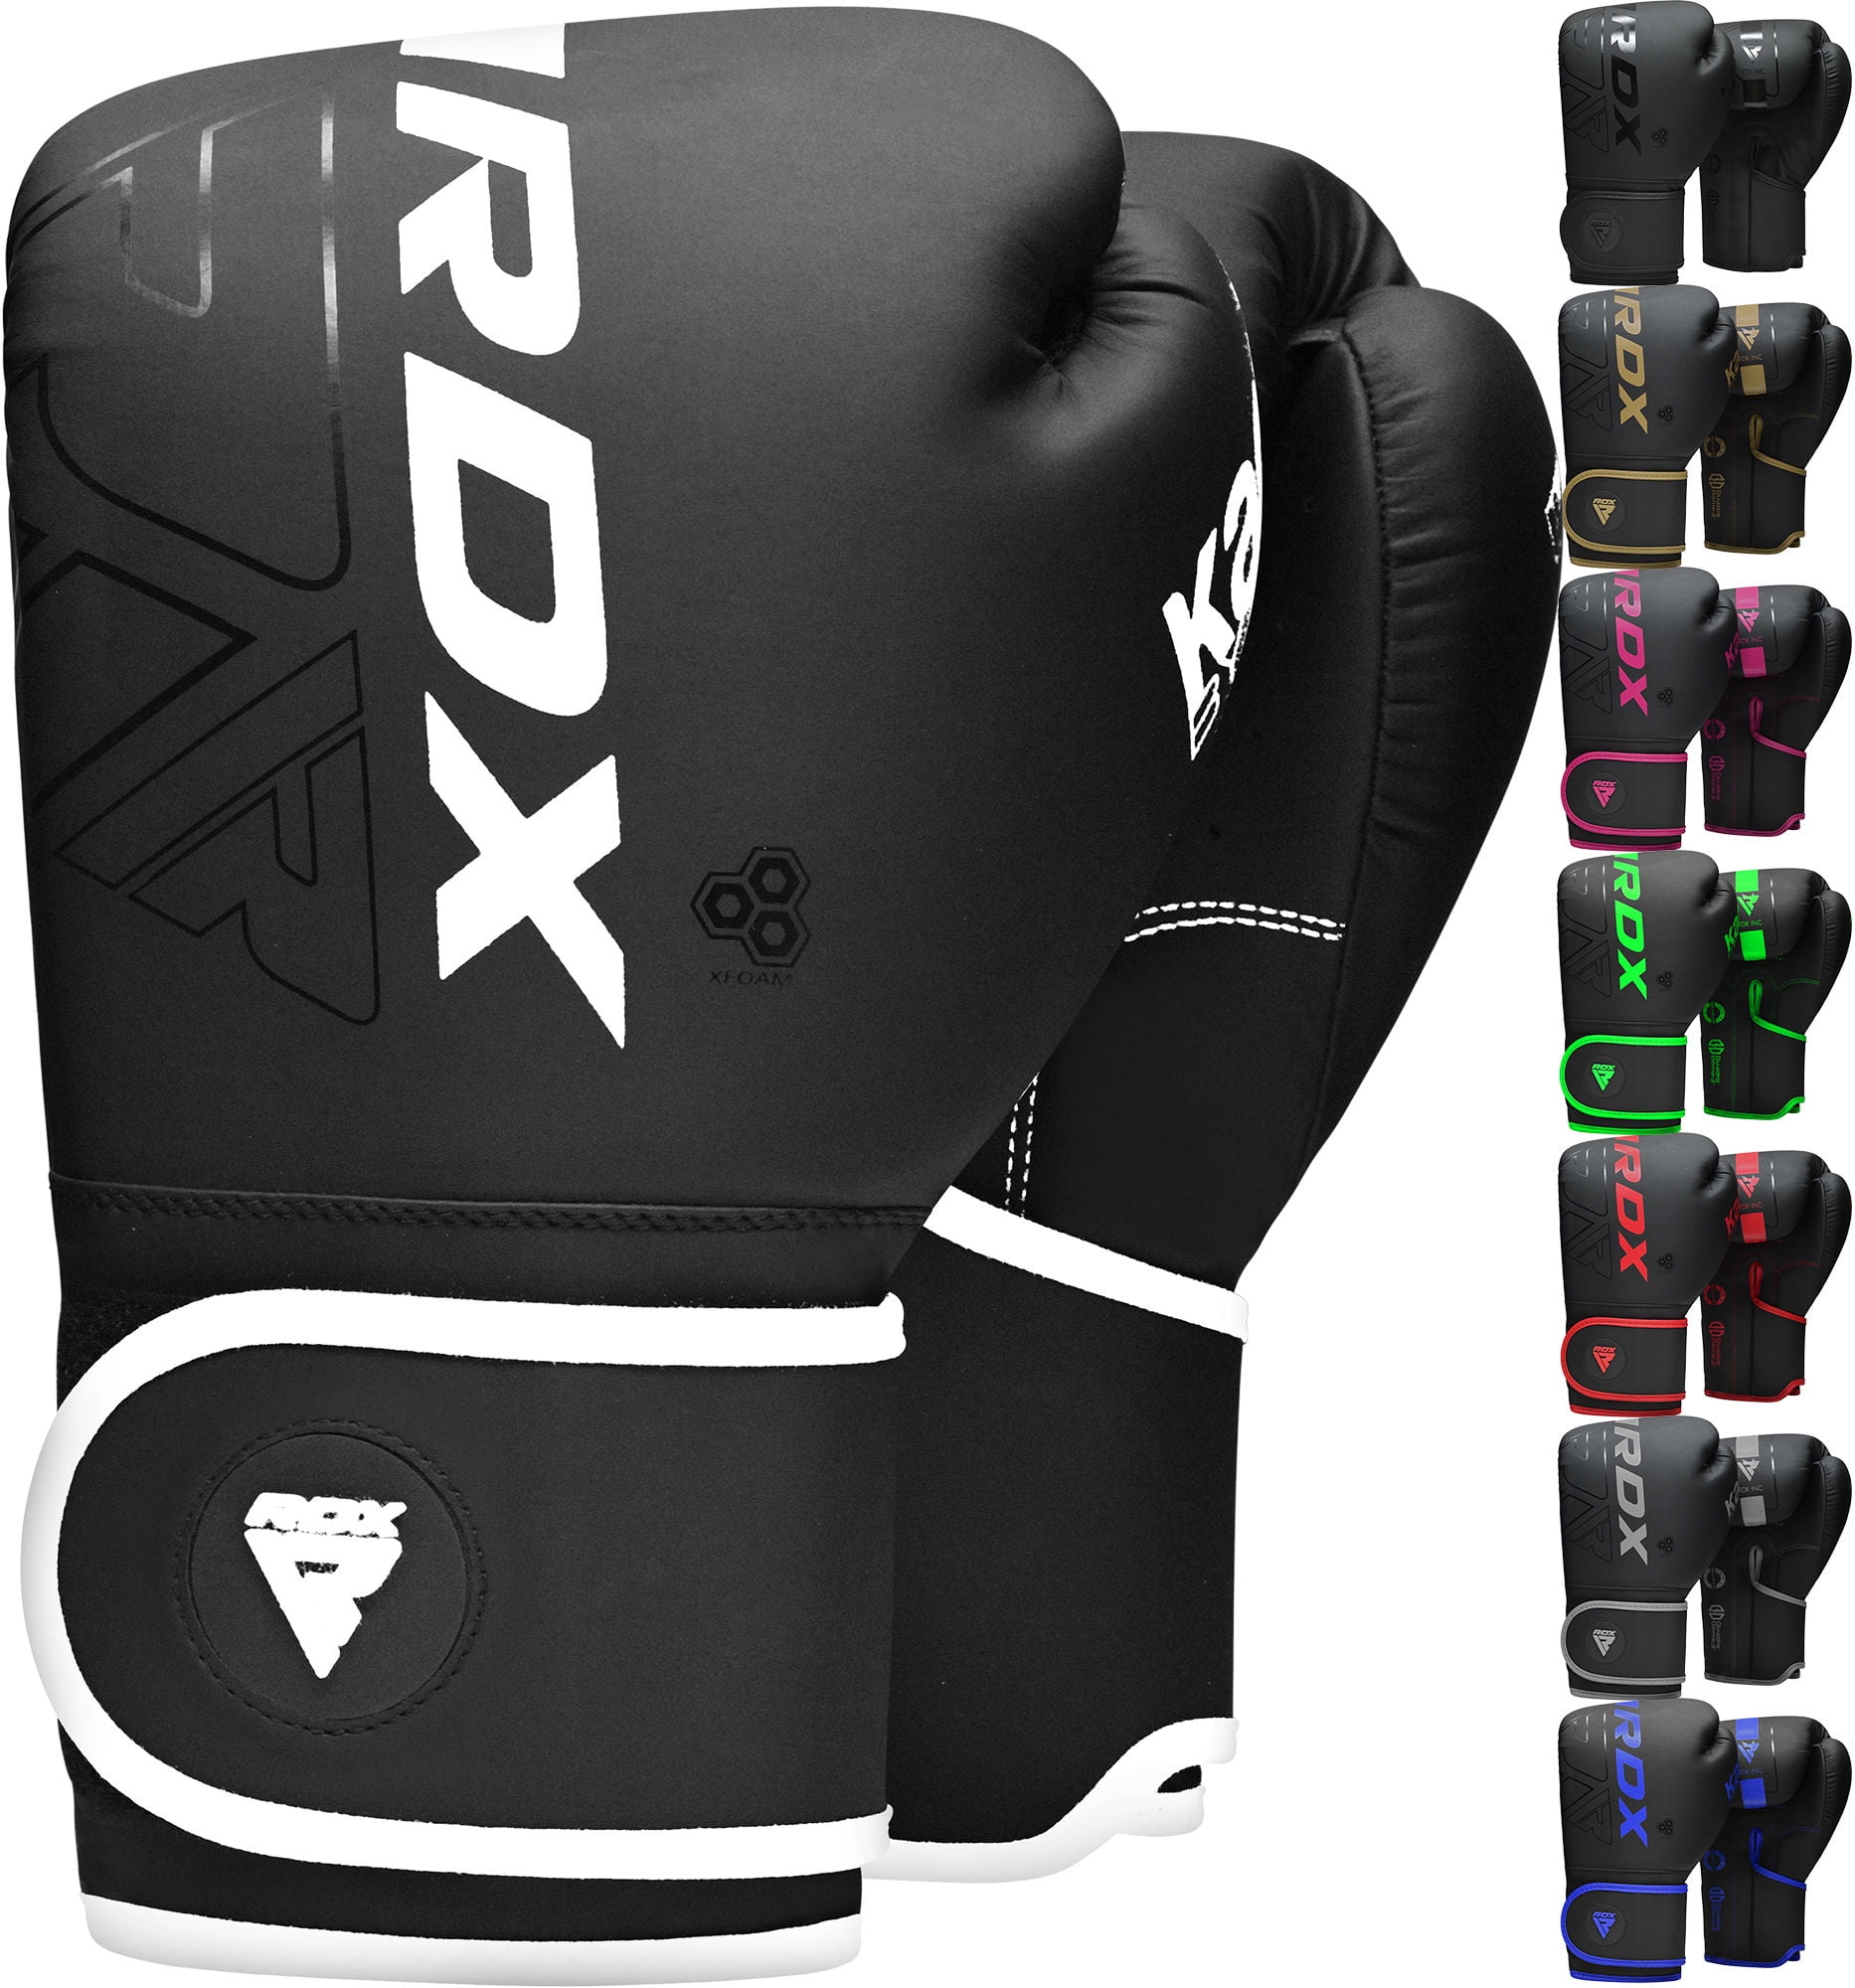 RDX F15 Sparring Martial Arts Grappling Fighting Cage Noir MMA Training Gloves 